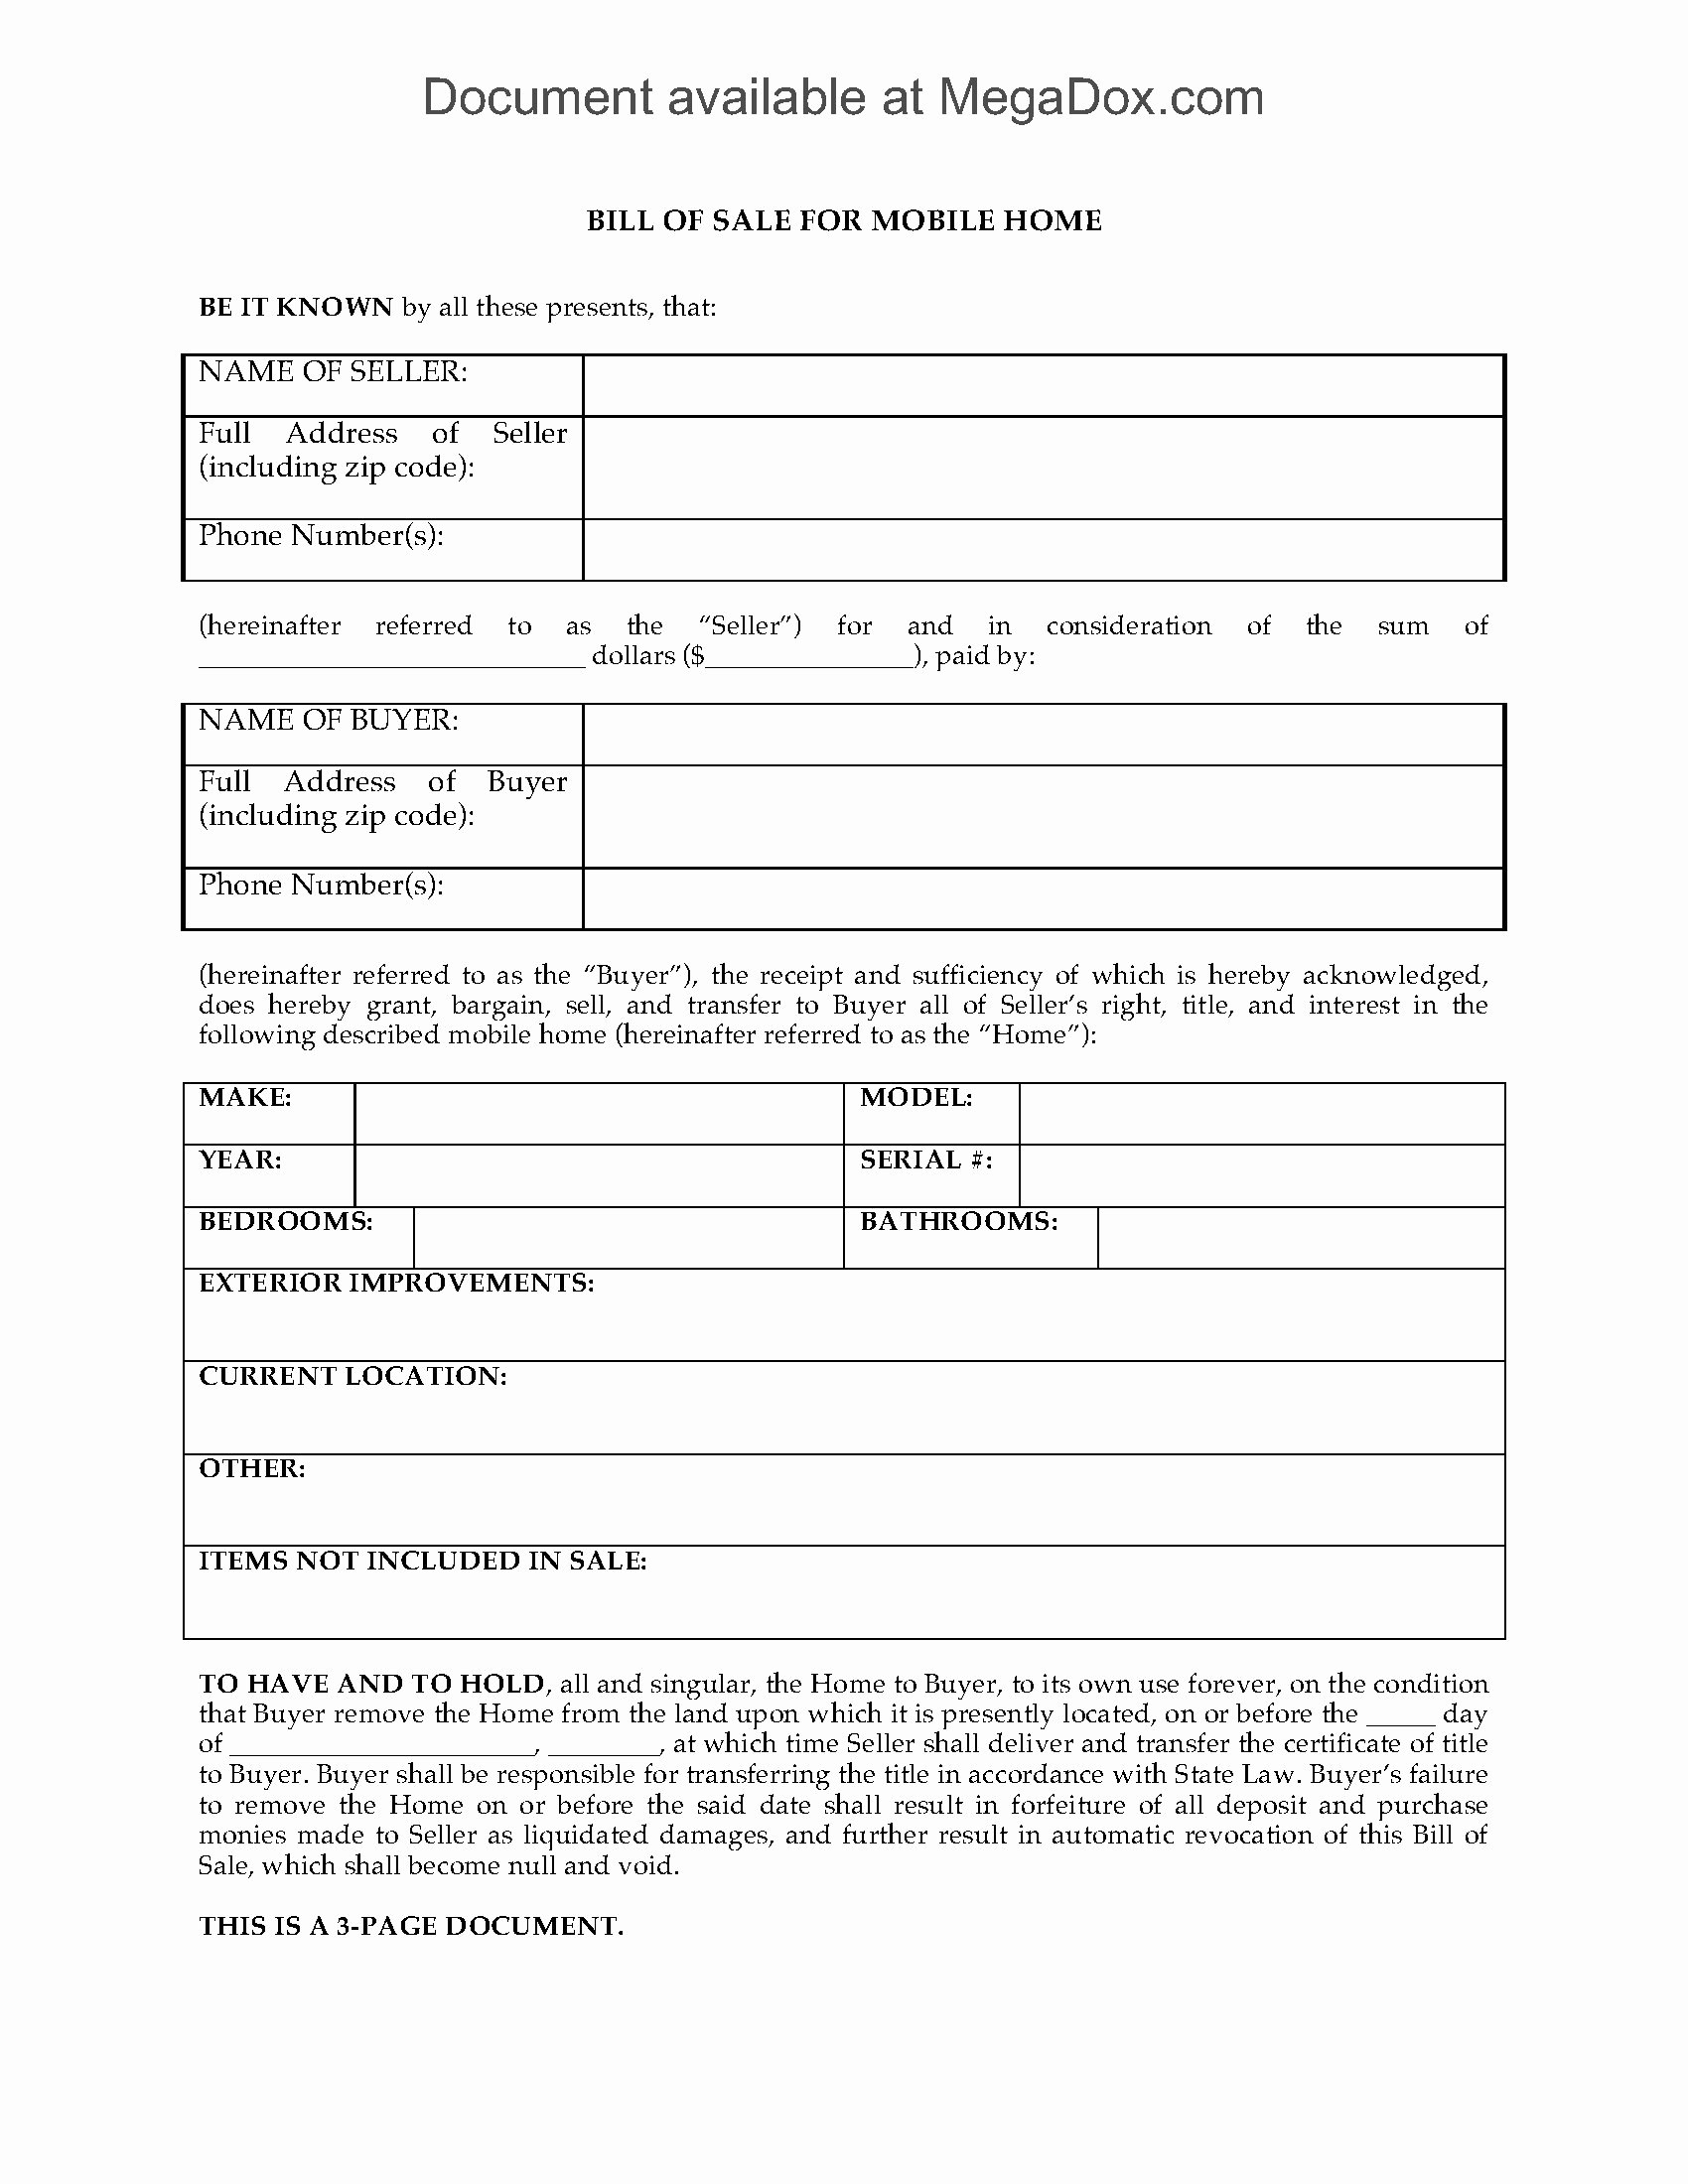 Business Bill Of Sale Template Lovely Georgia Bill Of Sale for Mobile Home